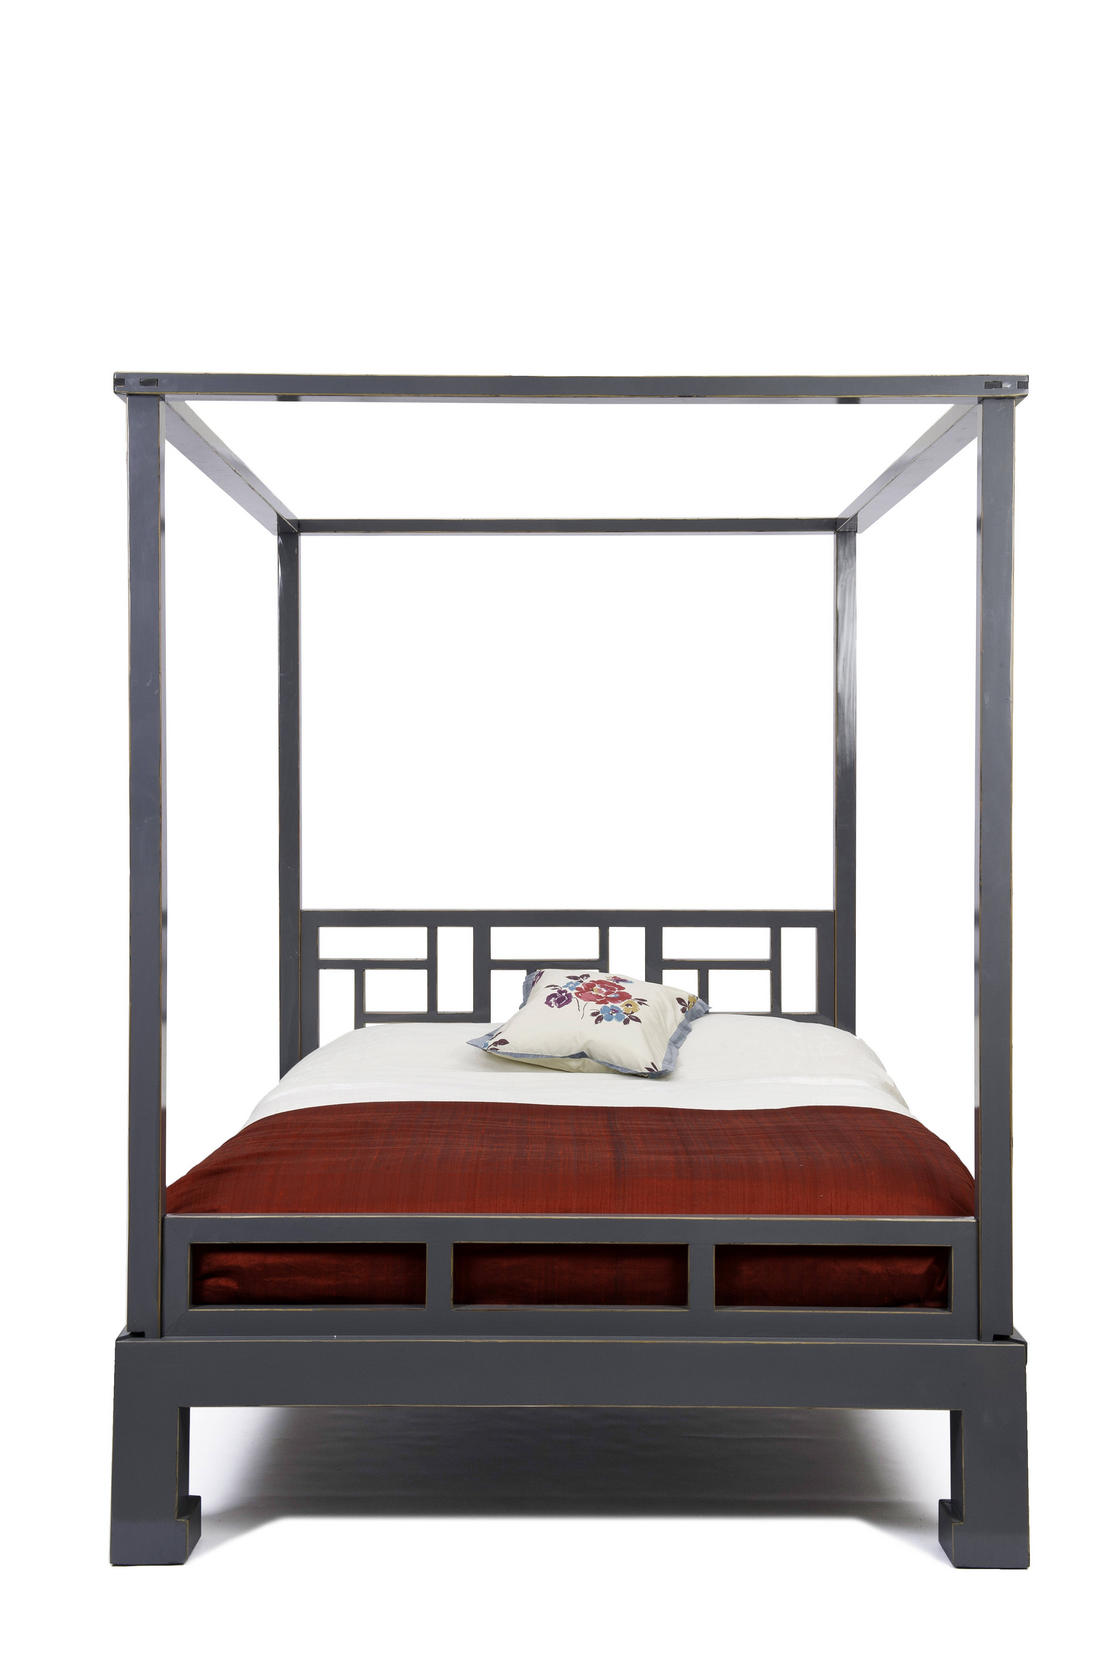 Orchid Furniture This Chinese four-poster elm bed, with a signature fretwork headboard in modern grey lacquer, is perfect for a simple home, HK$24,940